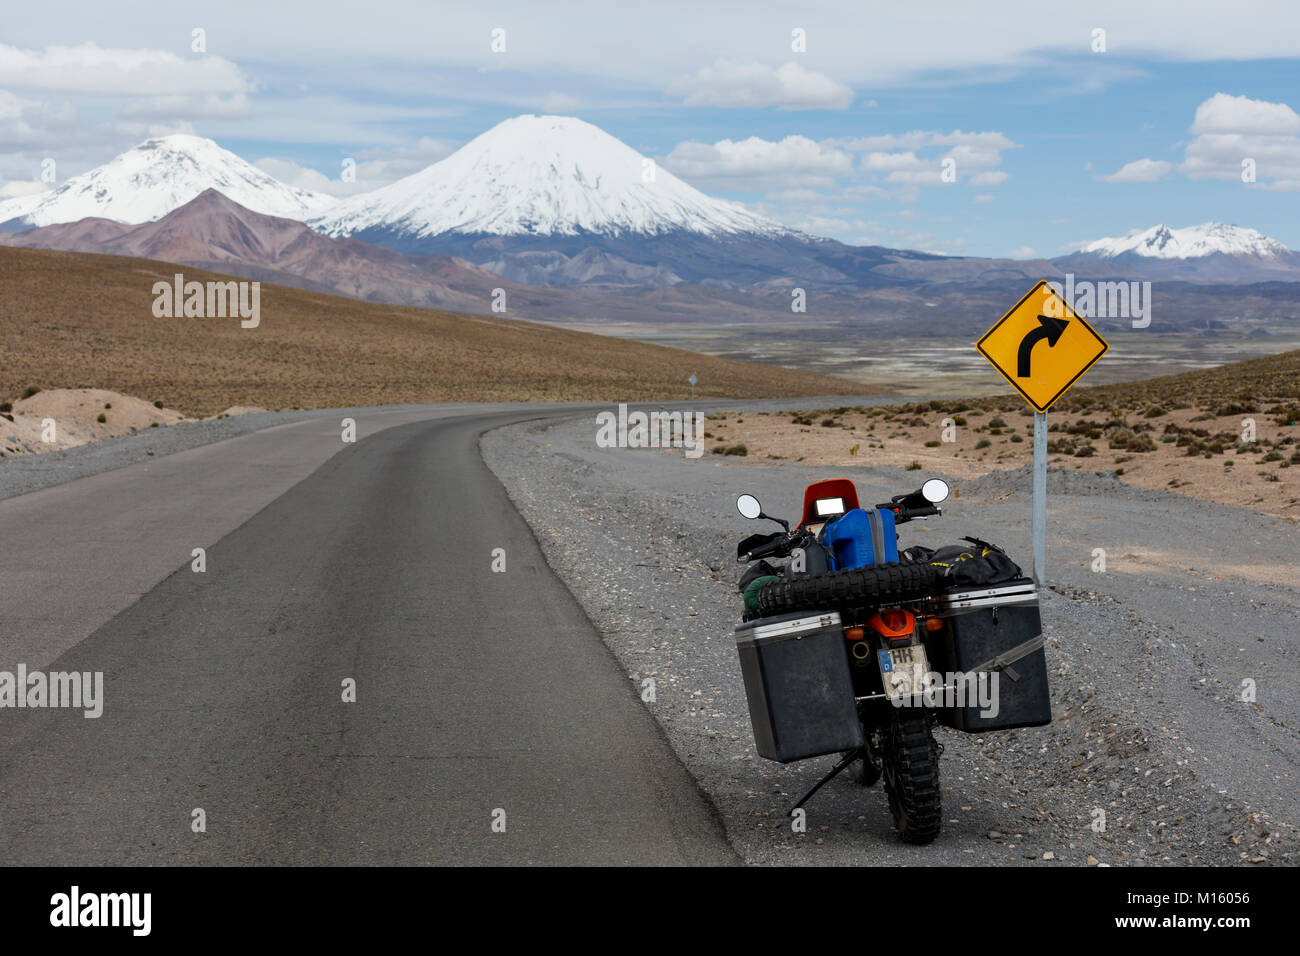 Heavily packed motorcycle at the roadside behind the volcano Pomerape,Putre,Region de Arica y Parinacota,Chile Stock Photo